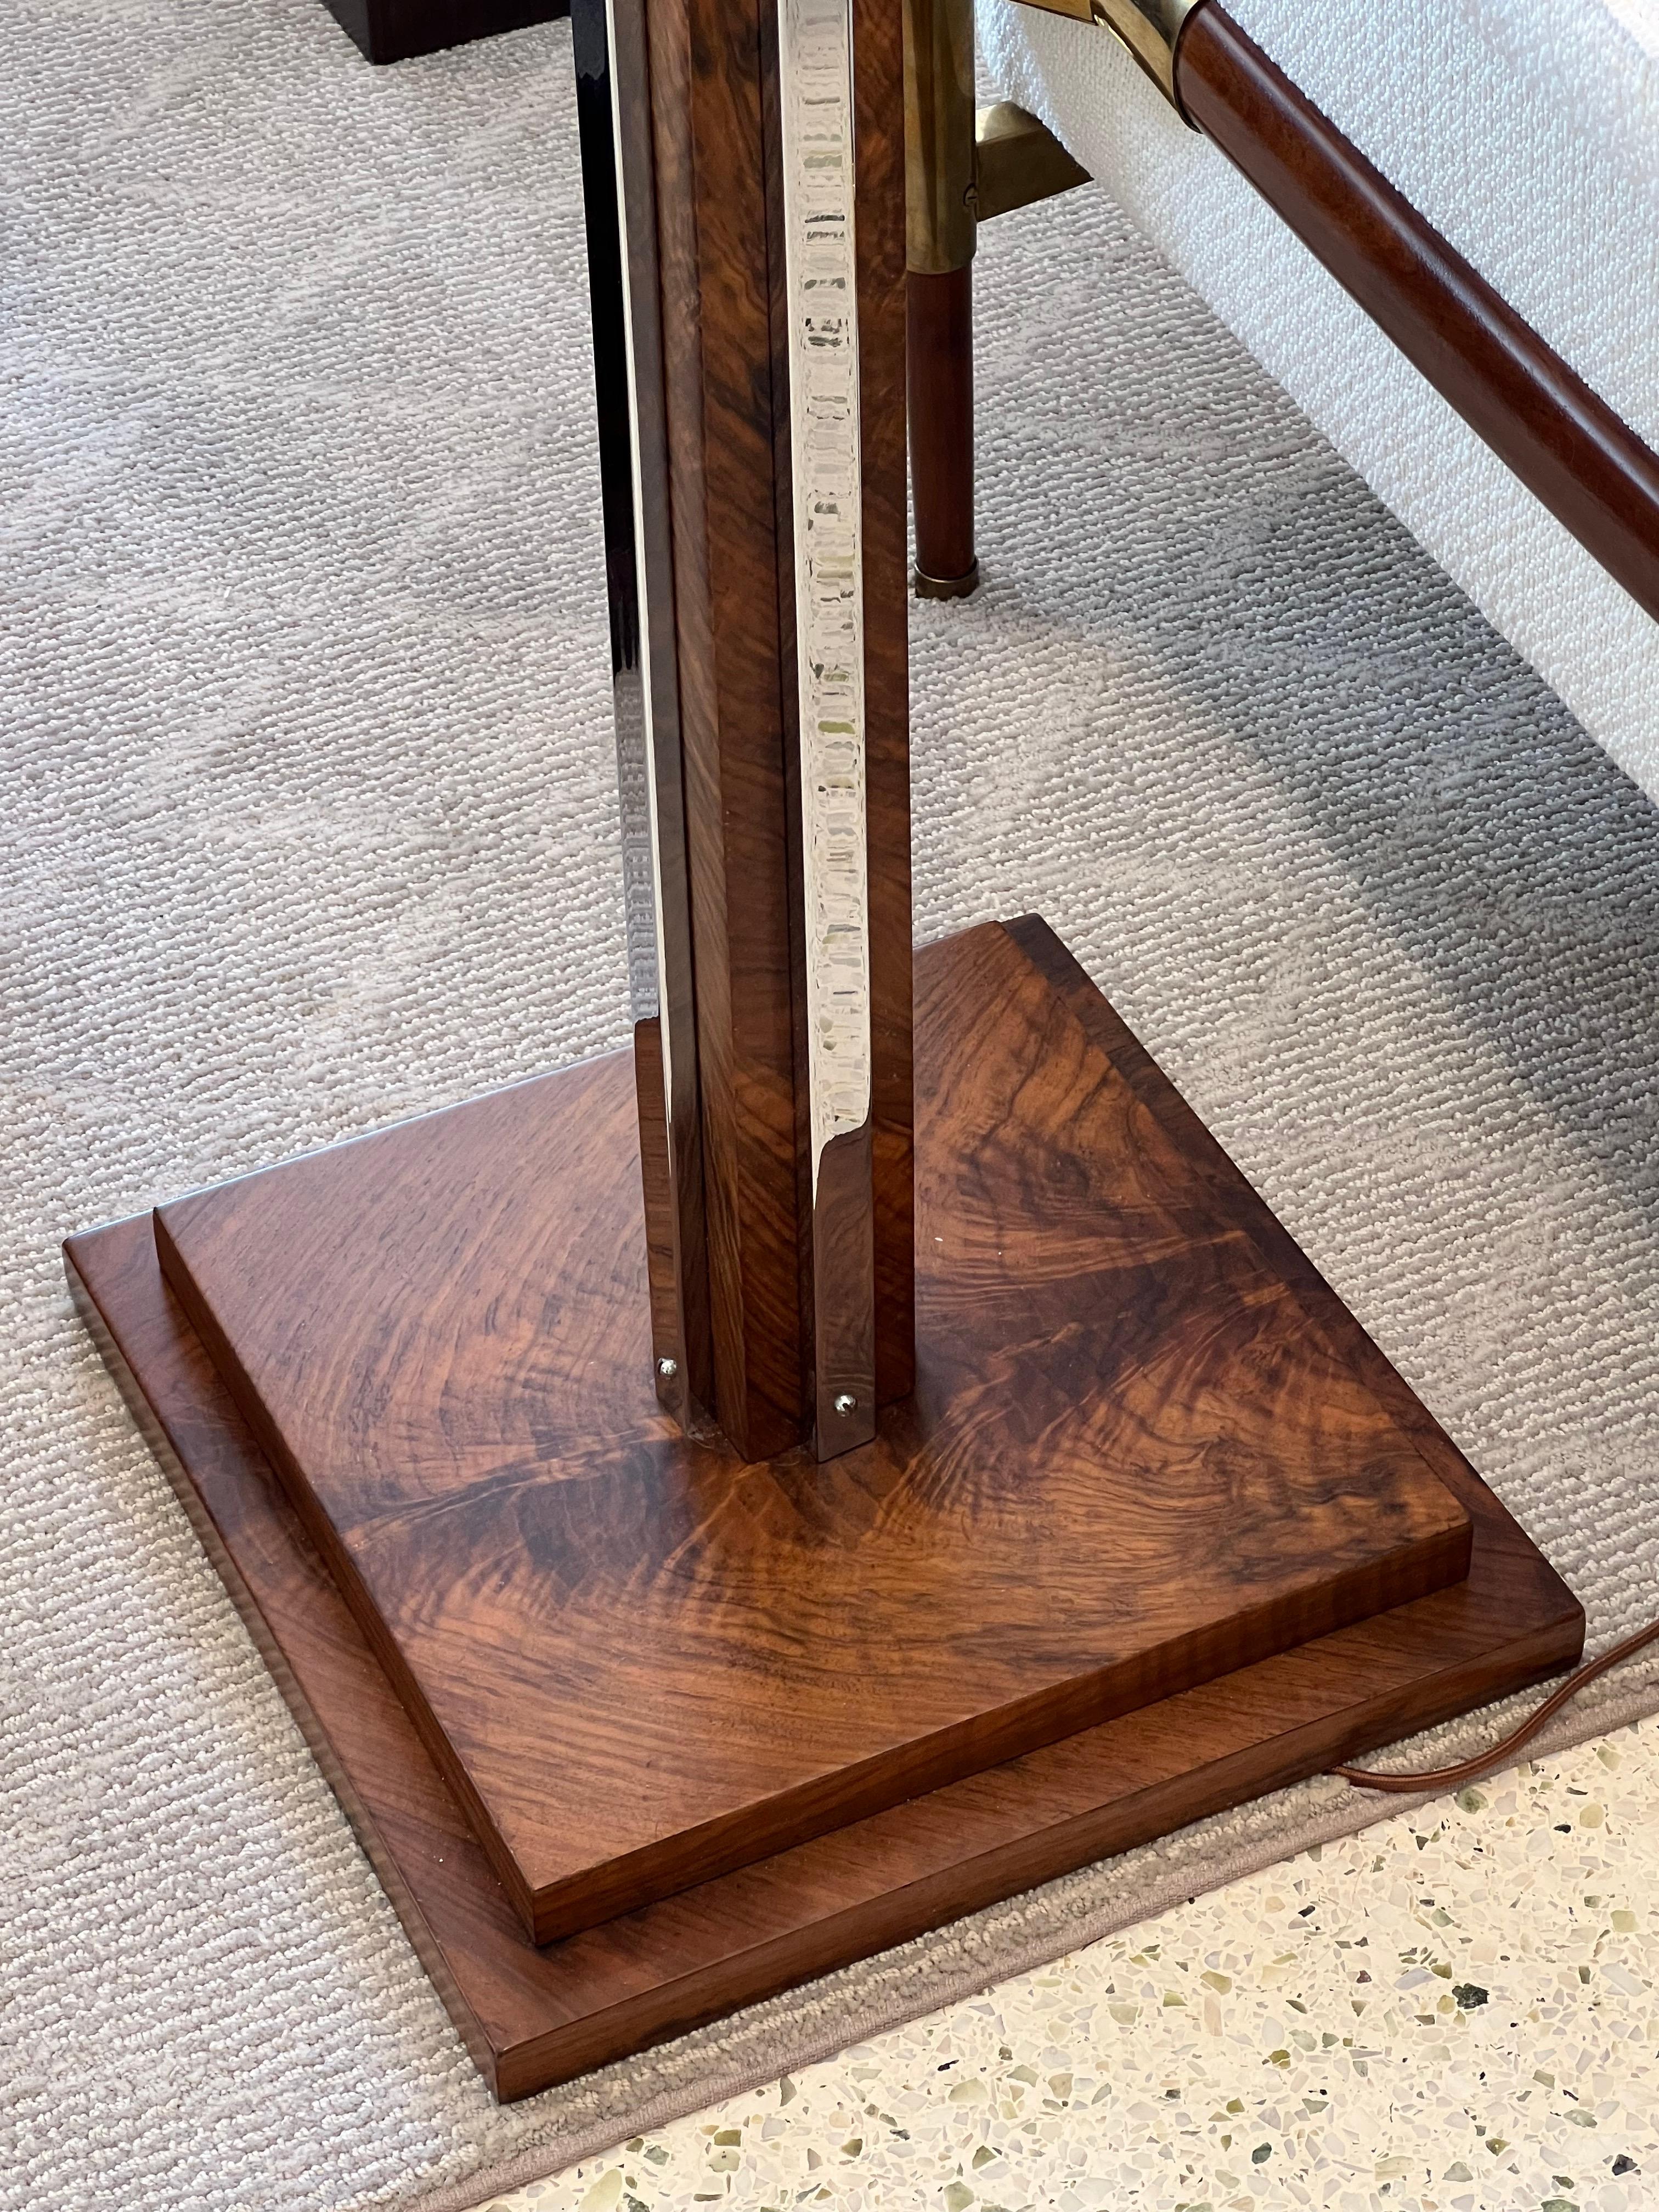 French Art Deco Floor Lamp For Sale